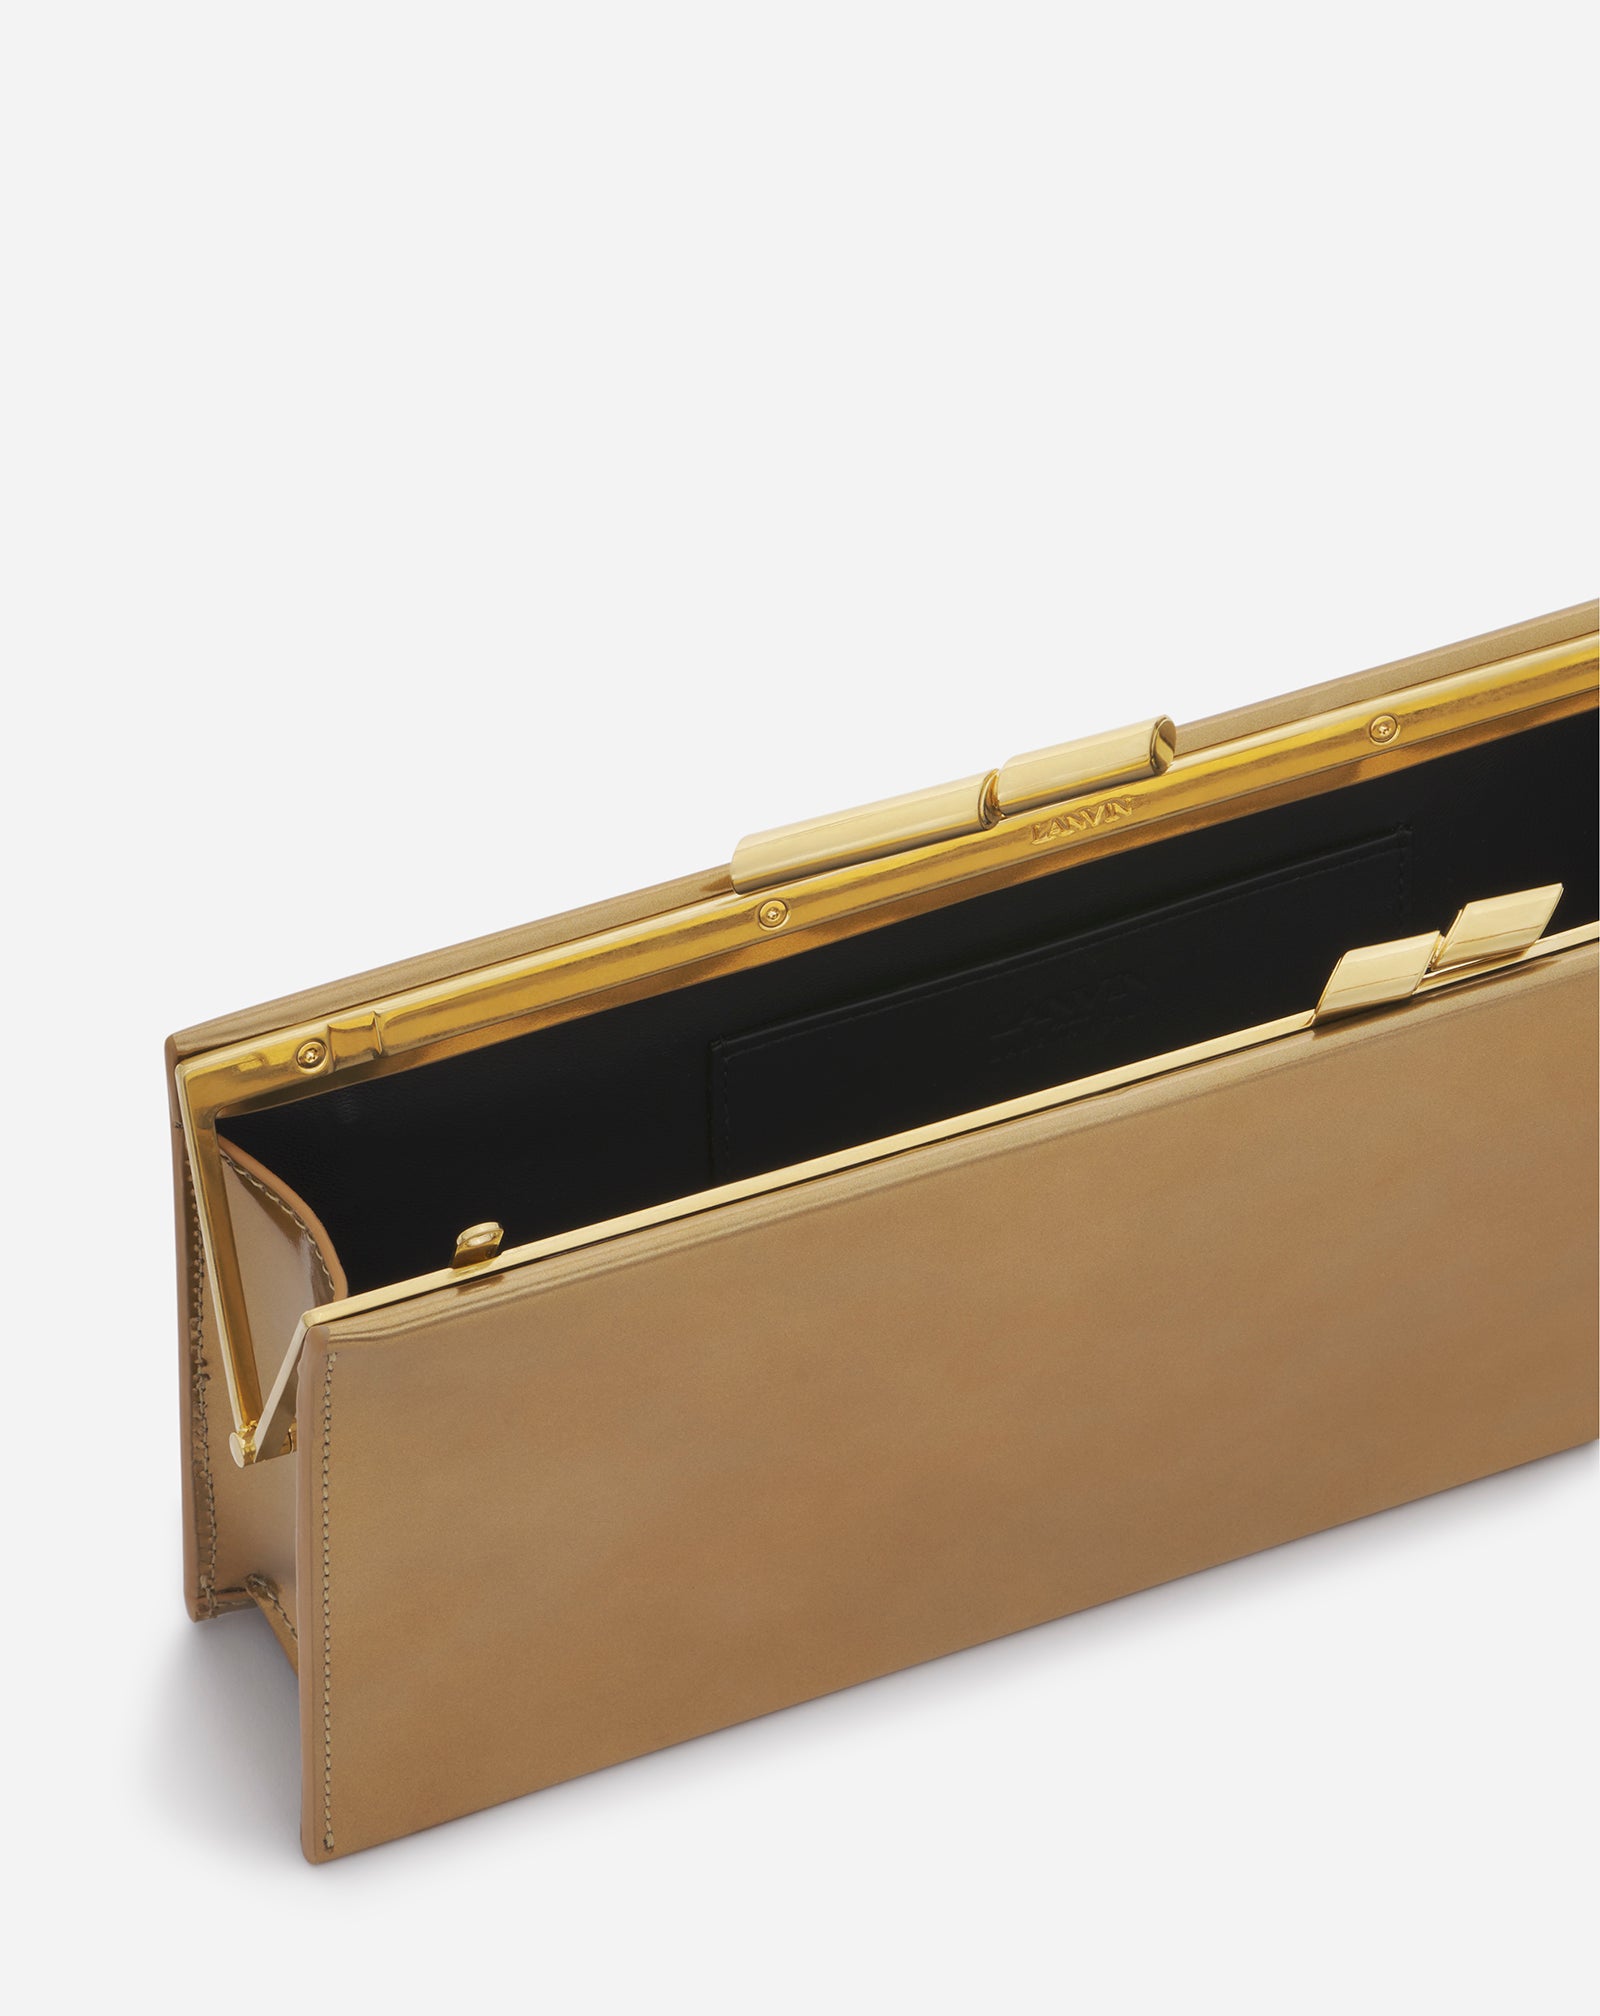 Sequence by Lanvin Metallic Leather Clutch Bag